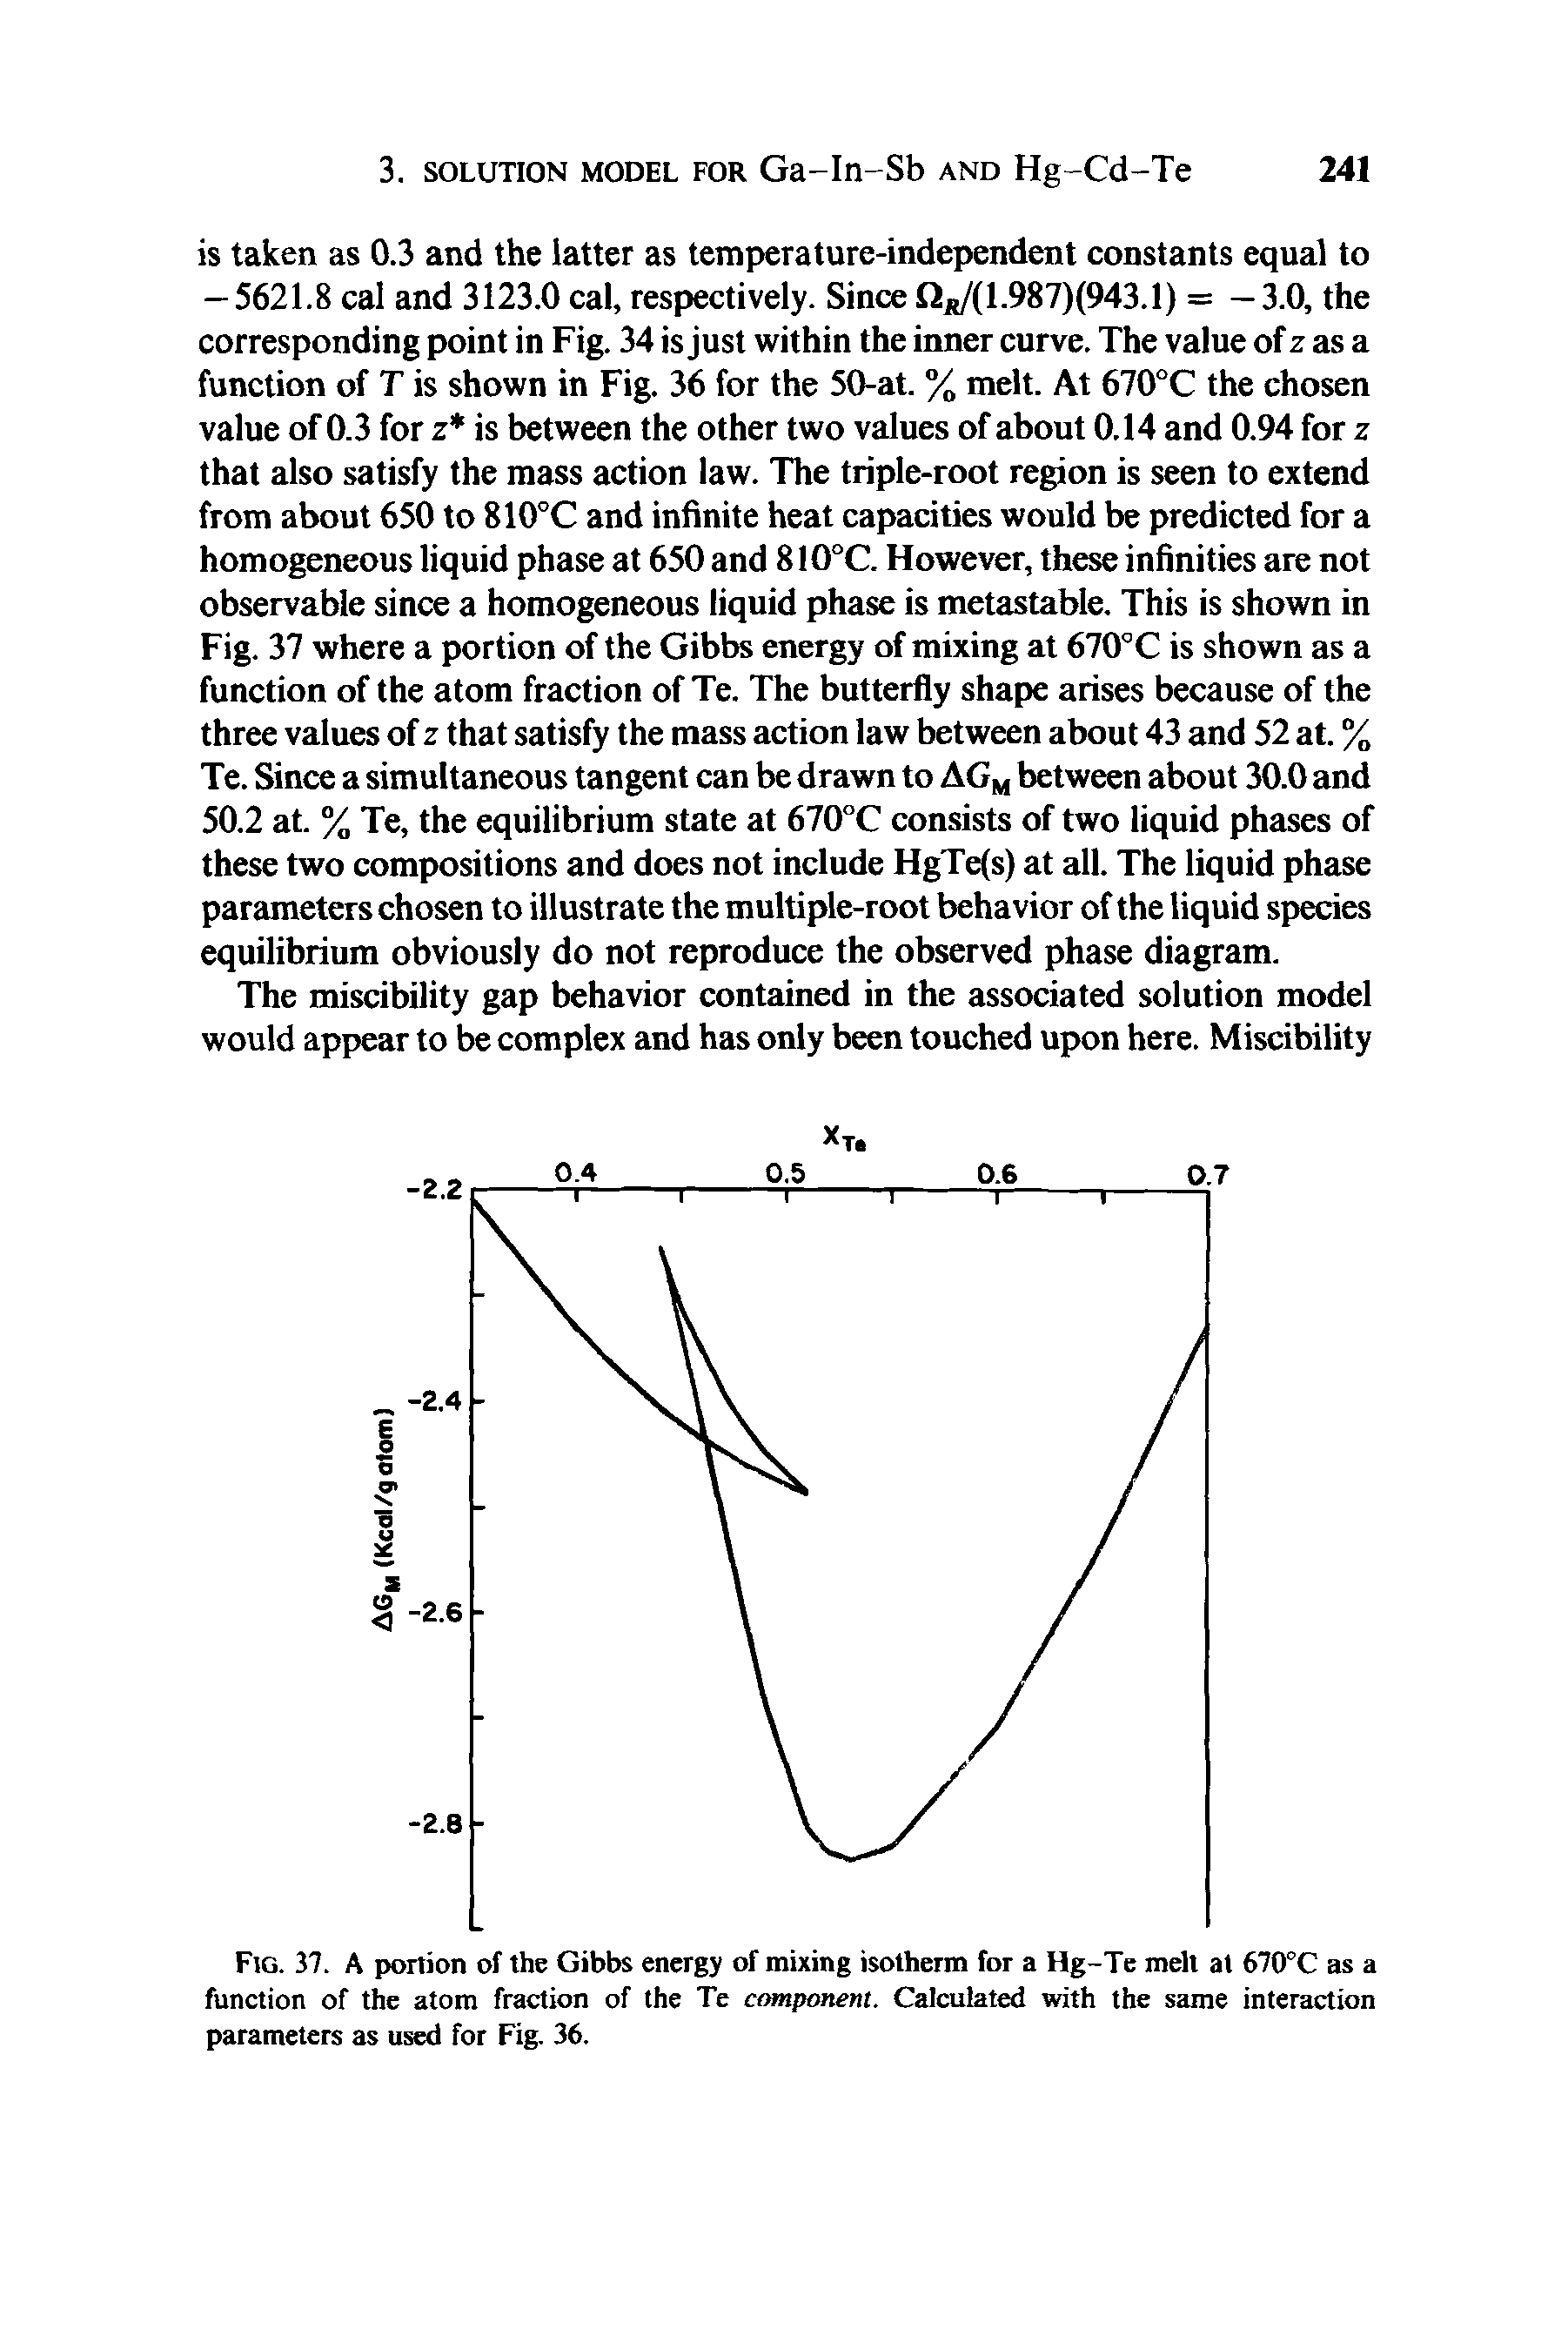 Fig. 37. A portion of the Gibbs energy of mixing isotherm for a Hg-Te melt at 670°C as a function of the atom fraction of the component. Calculated with the same interaction parameters as used for Fig. 36.